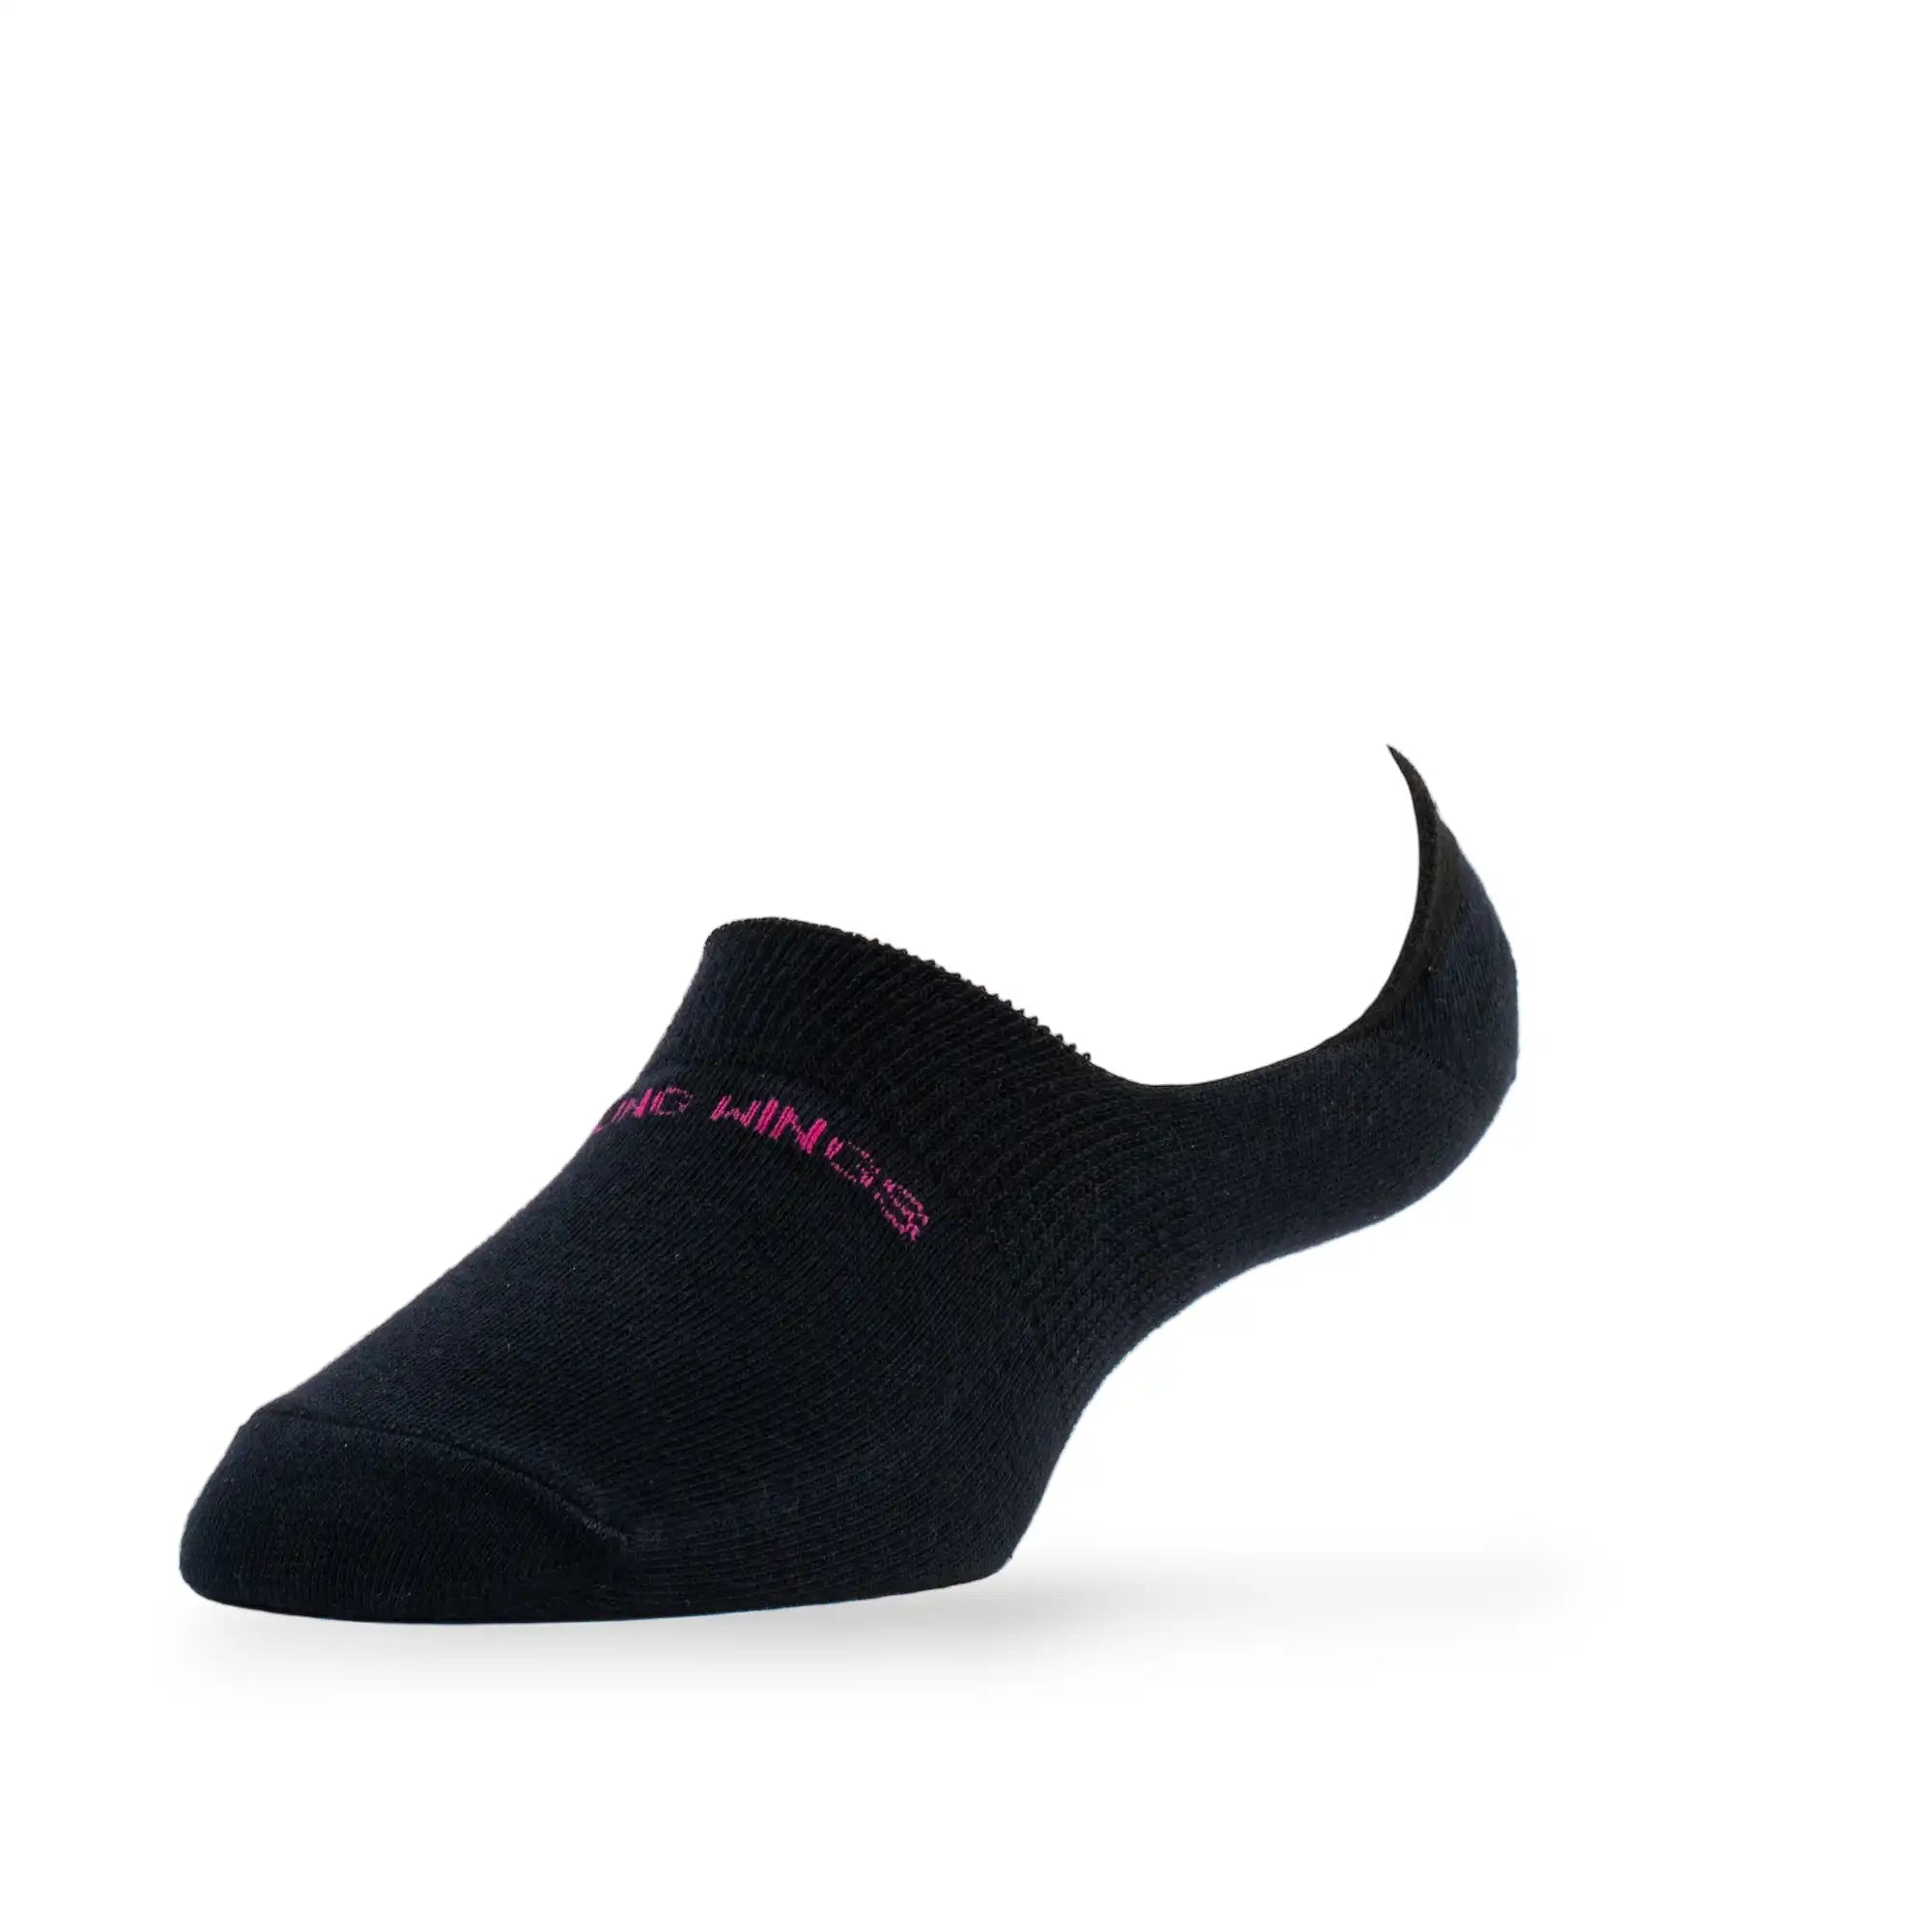 Young Wings Women's Black Colour Cotton Fabric Solid No-Show Socks - Pack of 5, Style no. 9001-W1